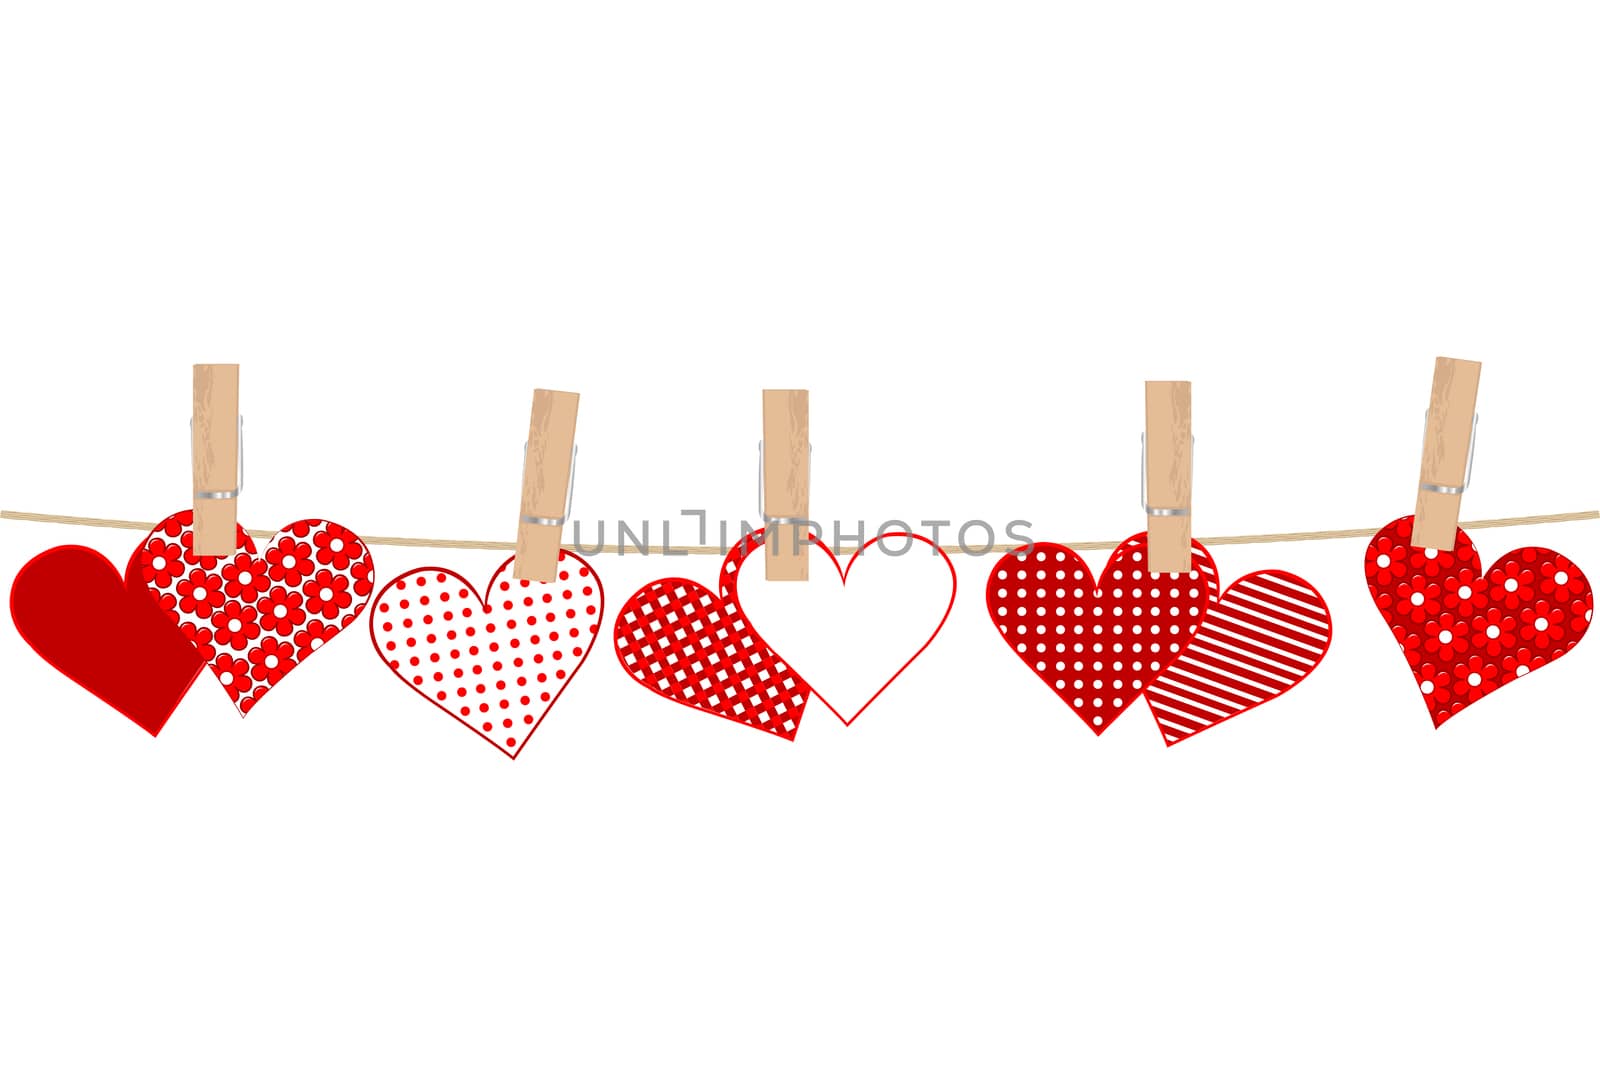 Valentines day concept with hearts and clothes pegs on rope by hibrida13